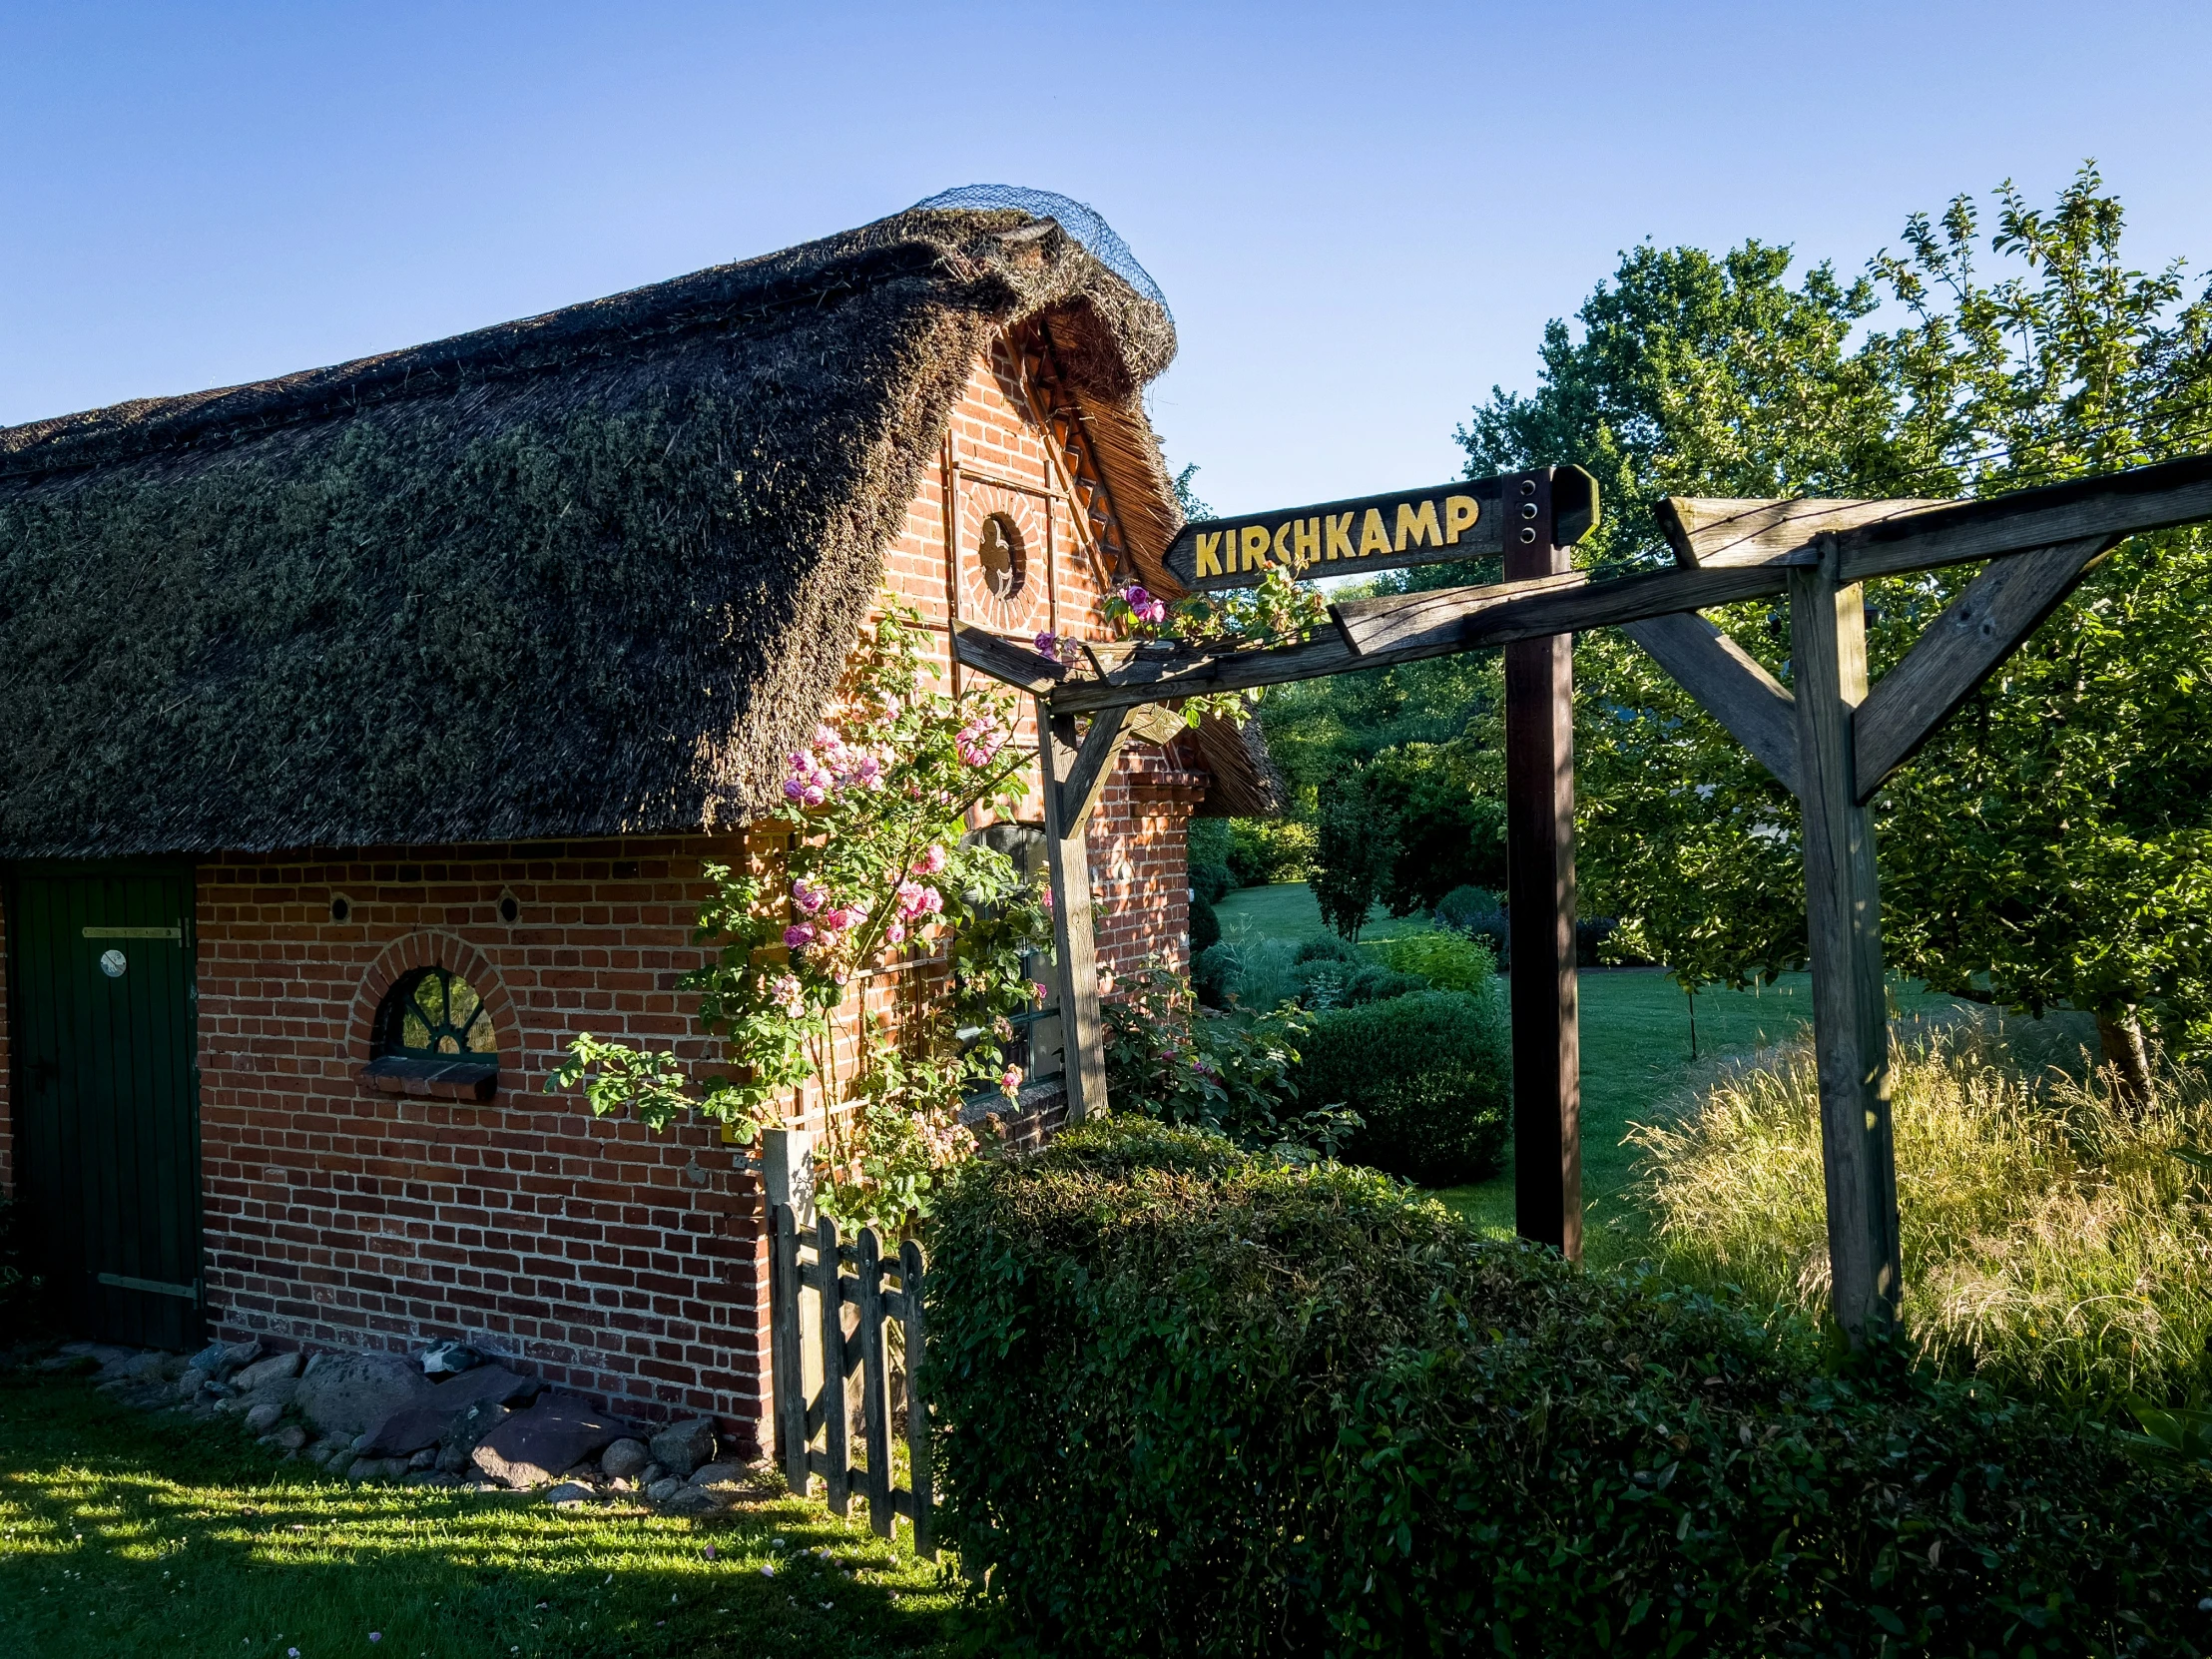 an old thatched - top building with some green plants